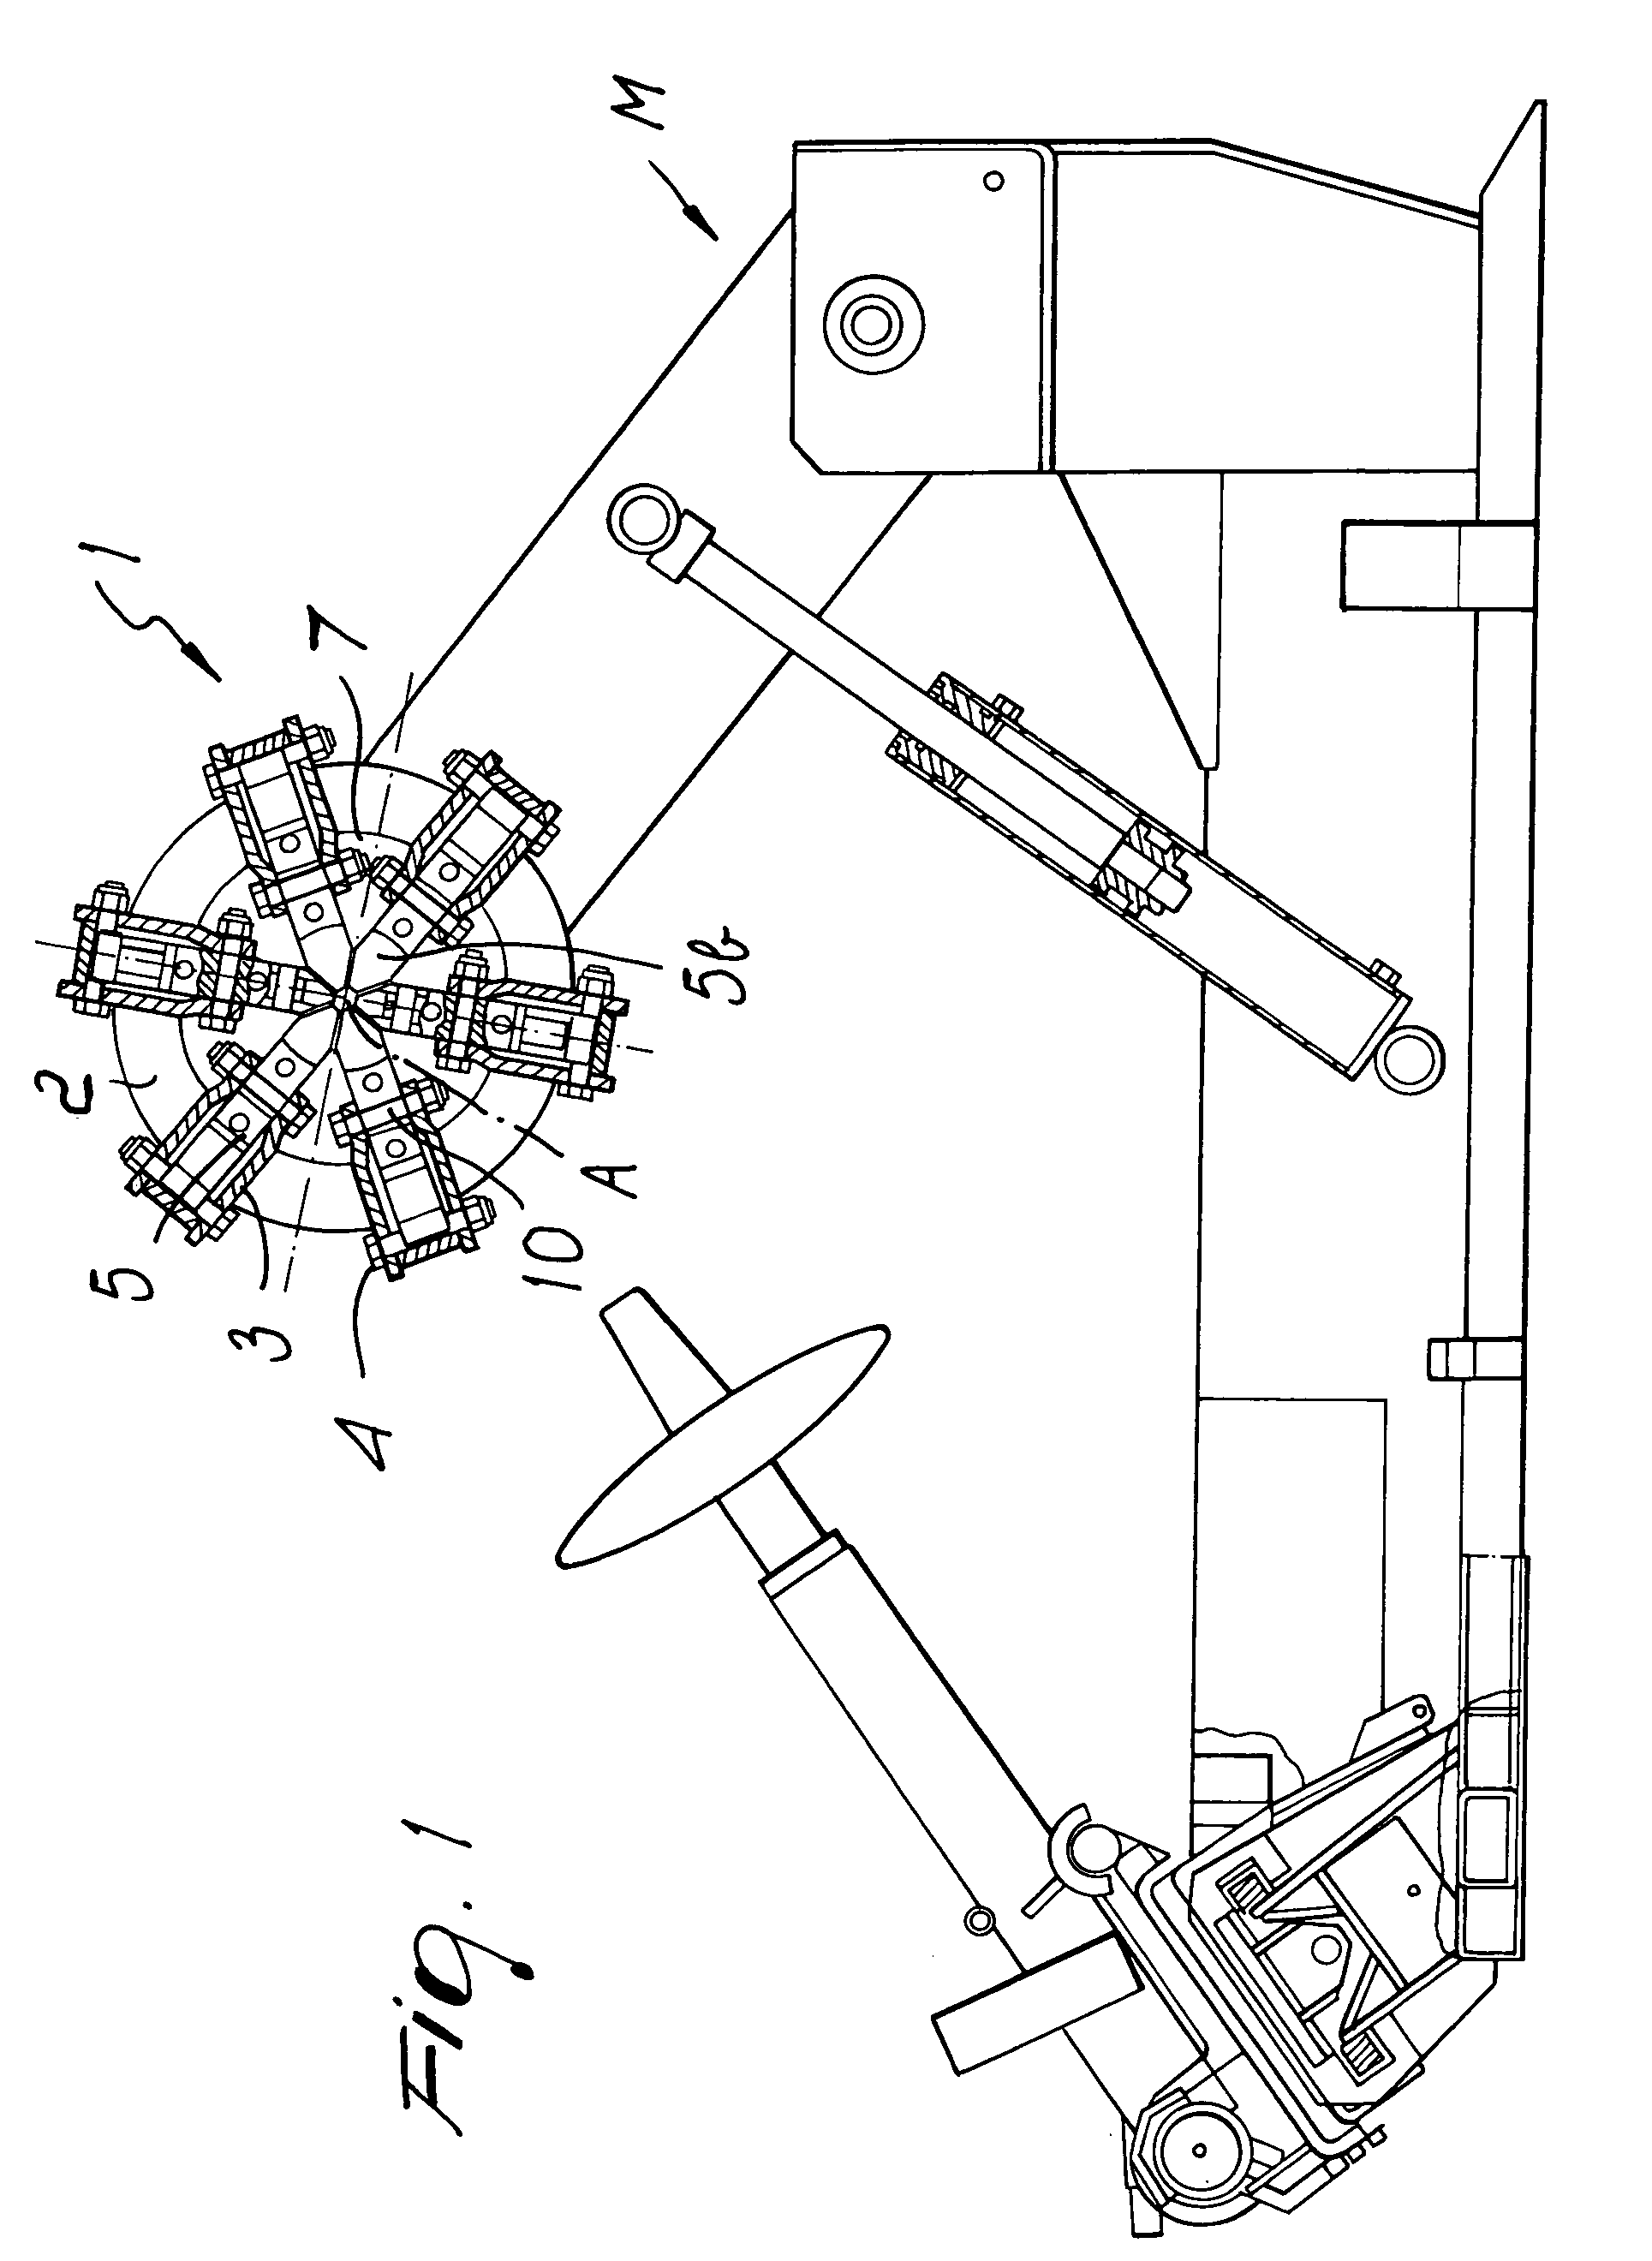 Spindle for fastening rims of vehicle wheels on repair shop machines